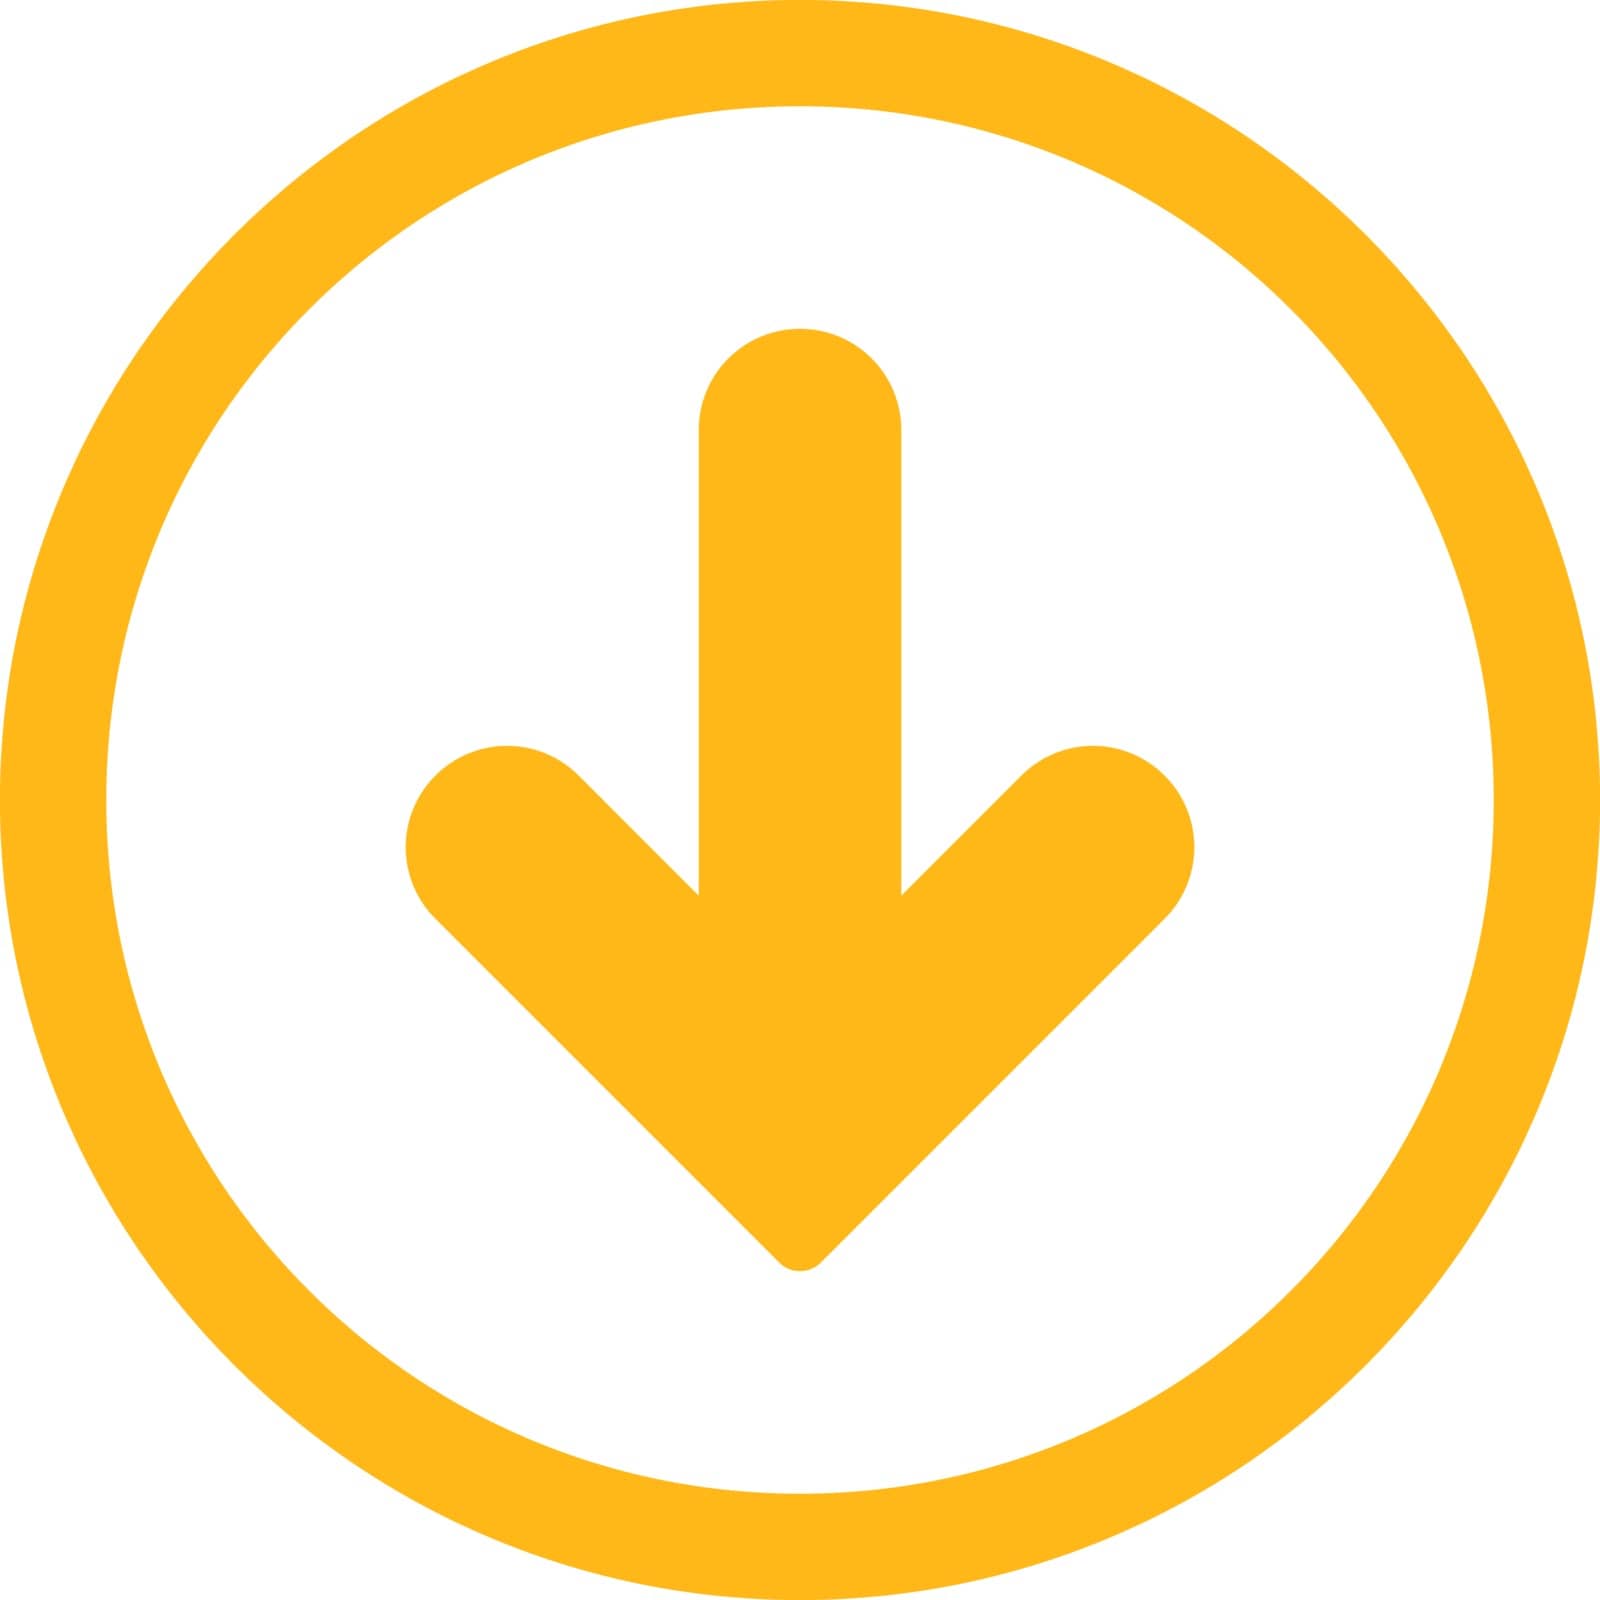 Arrow Down vector icon. This rounded flat symbol is drawn with yellow color on a white background.